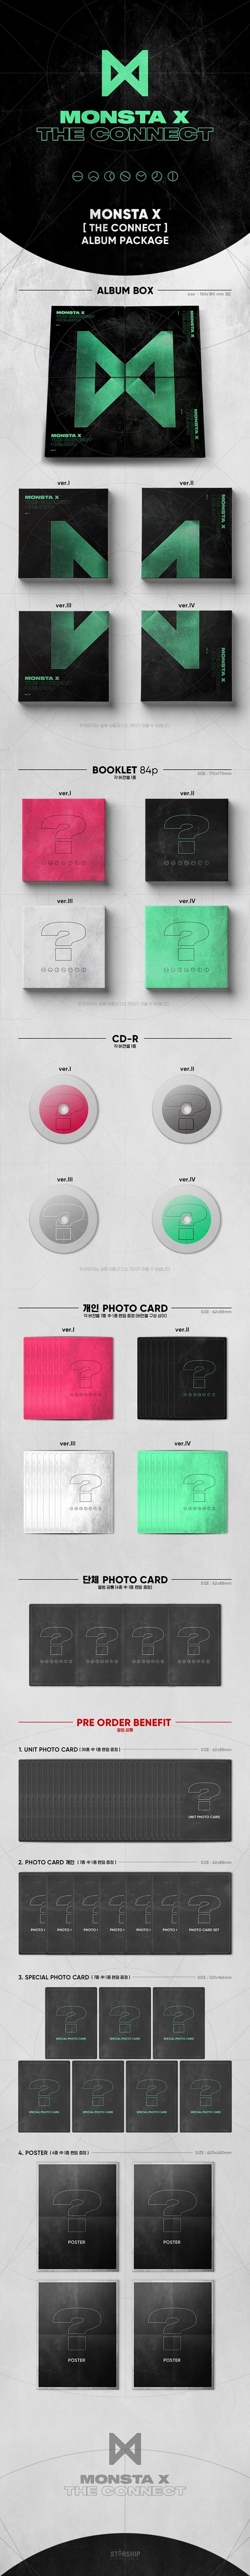 1 CD
1 Booklet (84 pages)
1 Member Photo Card
1 Group Photo Card